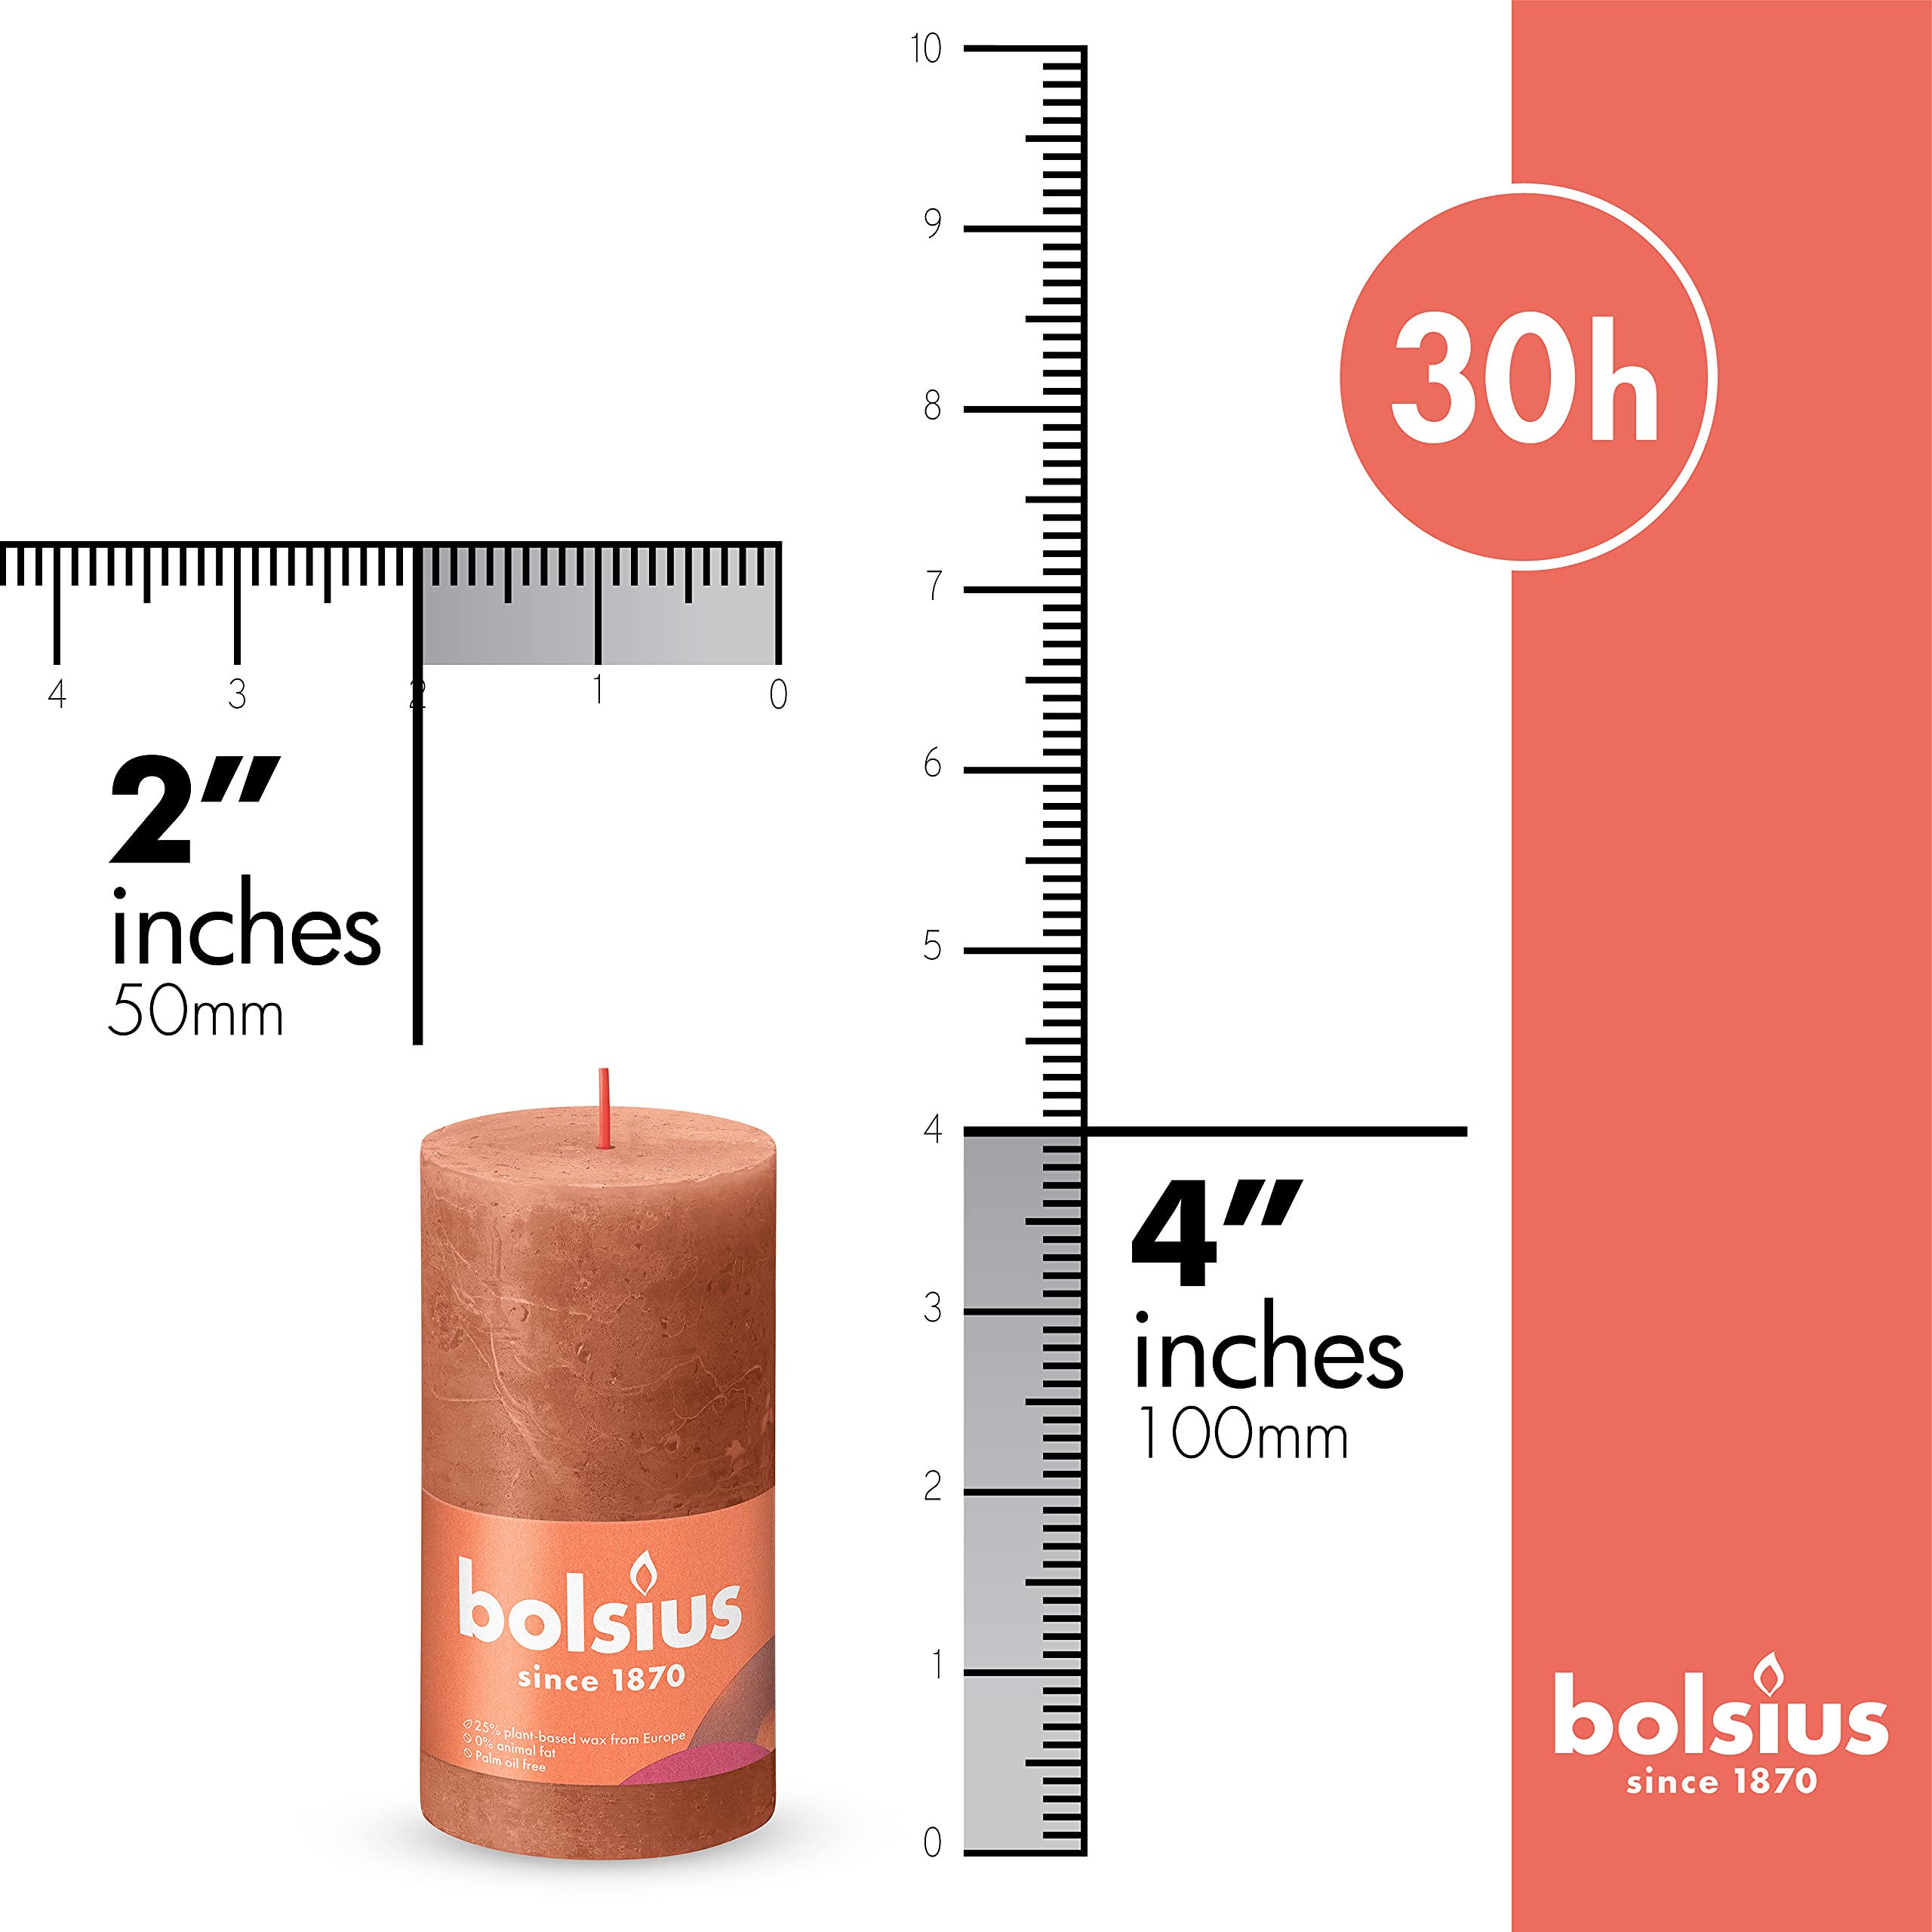 BOLSIUS 4 Pack Rusty Pink Rustic Pillar Candles - 2 X 4 Inches - Premium European Quality - Includes Natural Plant-Based Wax - Unscented Dripless Smokeless 30 Hour Party D�cor and Wedding Candles  - Acceptable